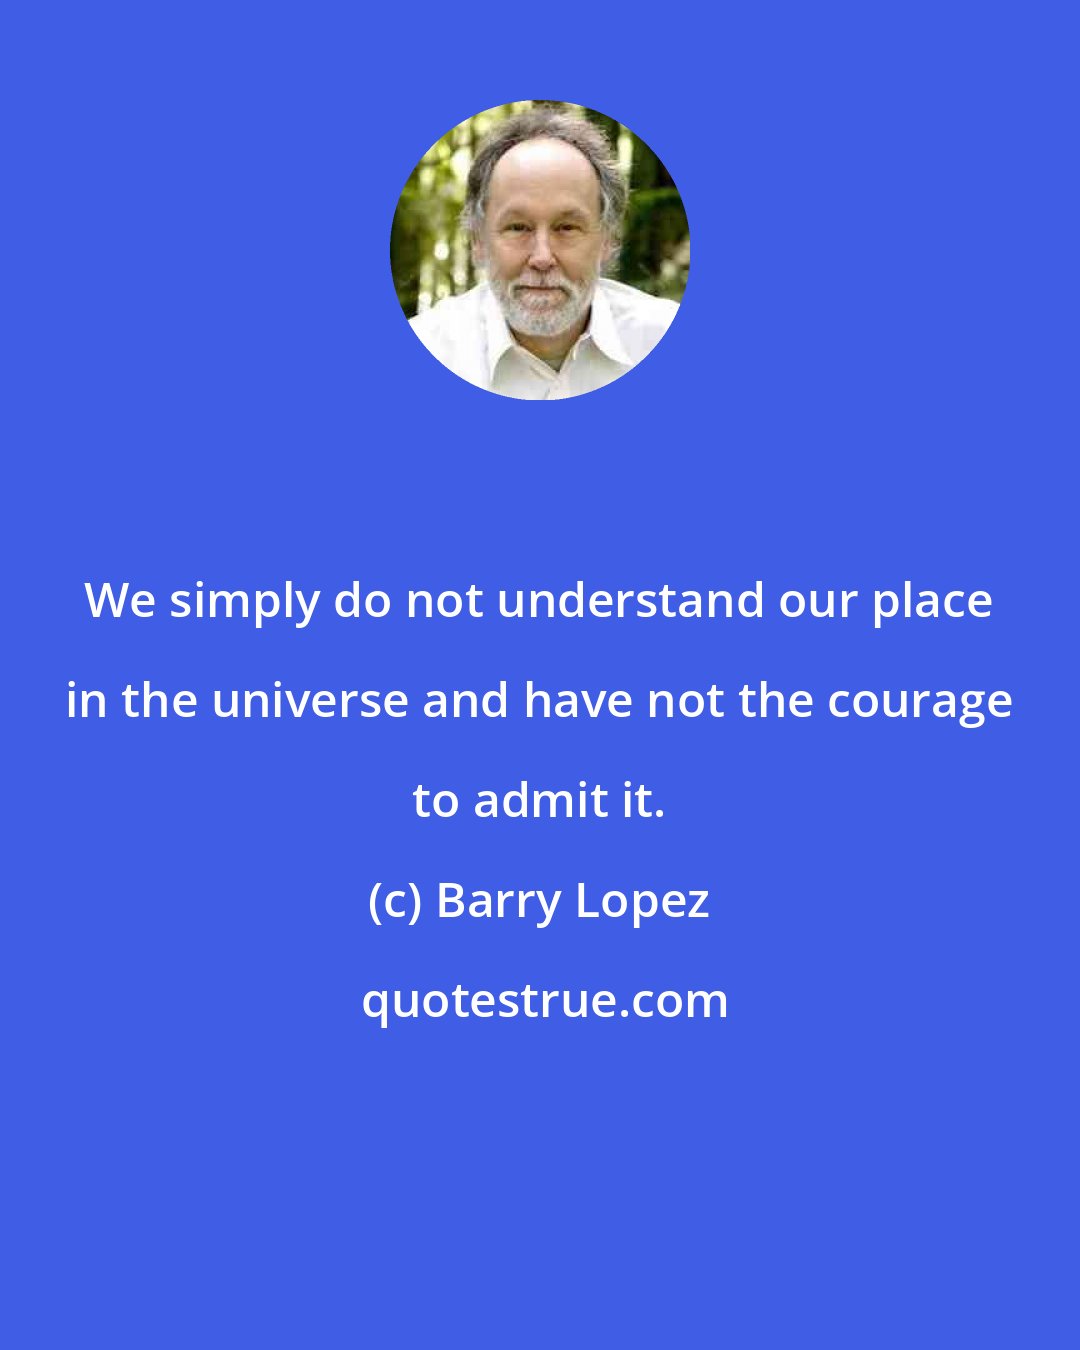 Barry Lopez: We simply do not understand our place in the universe and have not the courage to admit it.